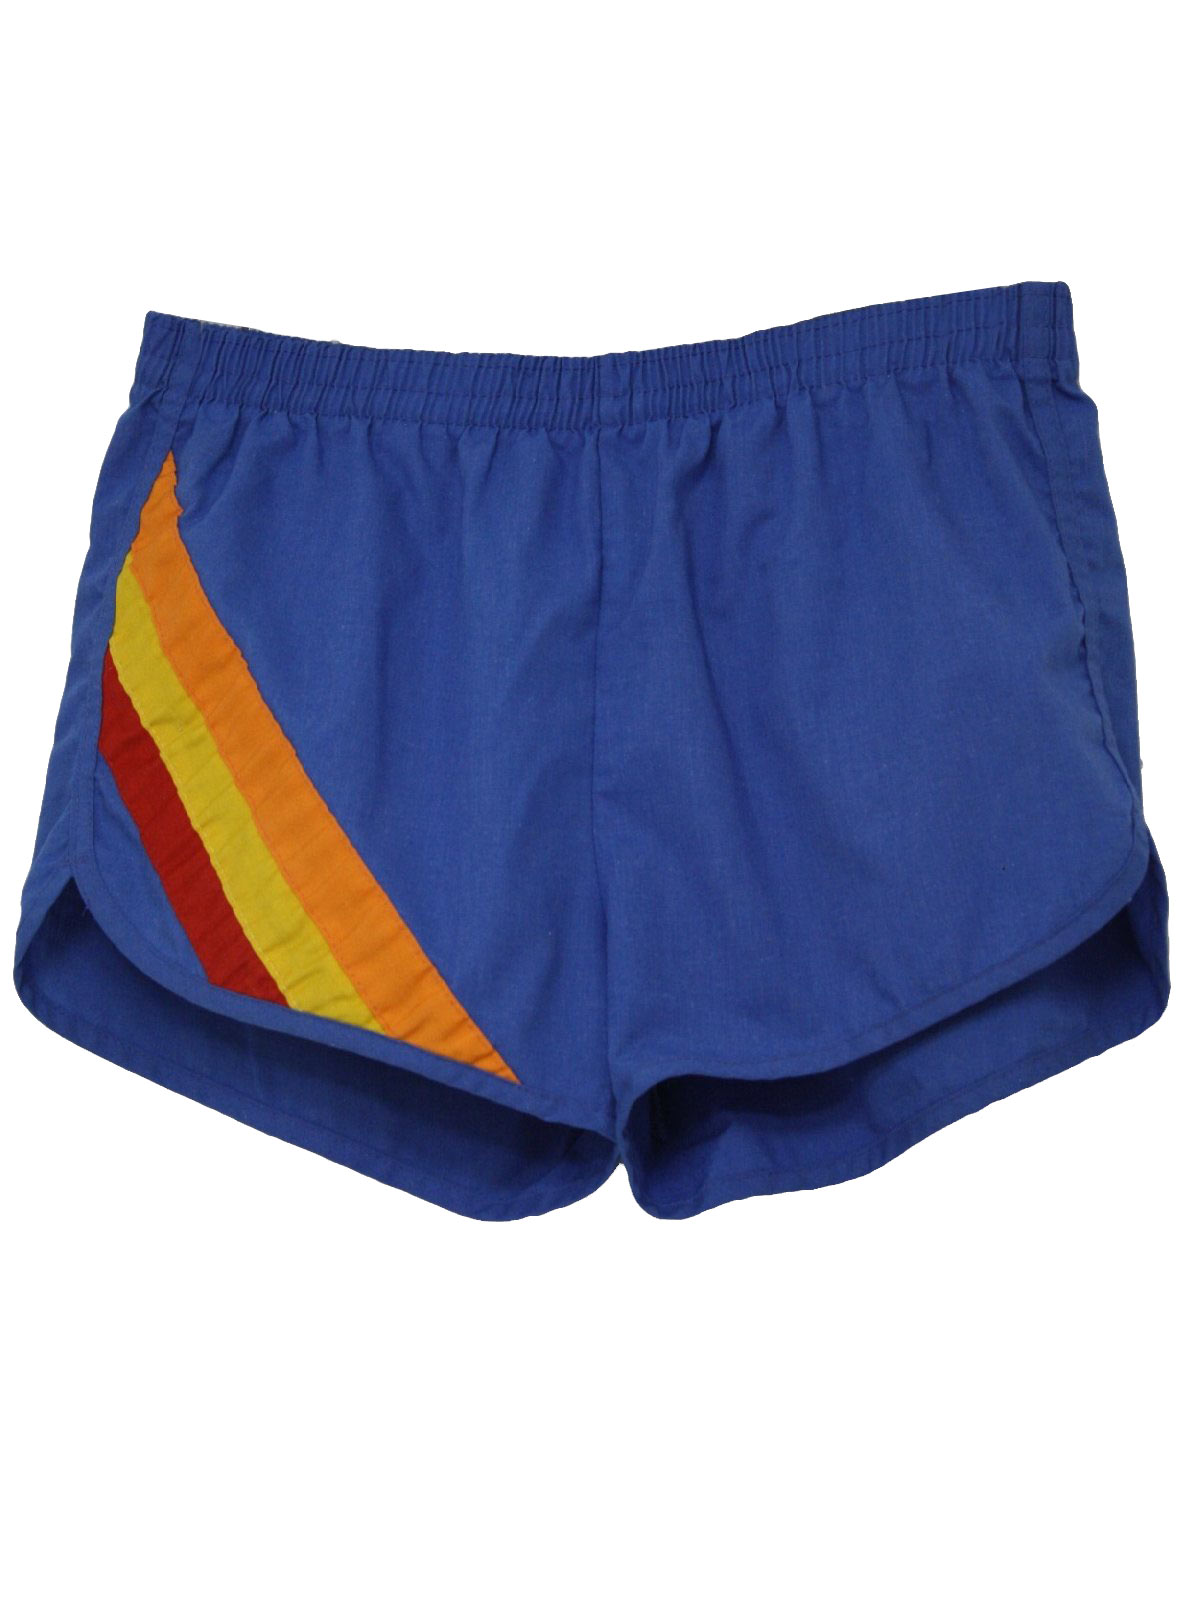 Retro 1980s Shorts: 80s -Sea Mark- Mens blue polyester and cotton ...